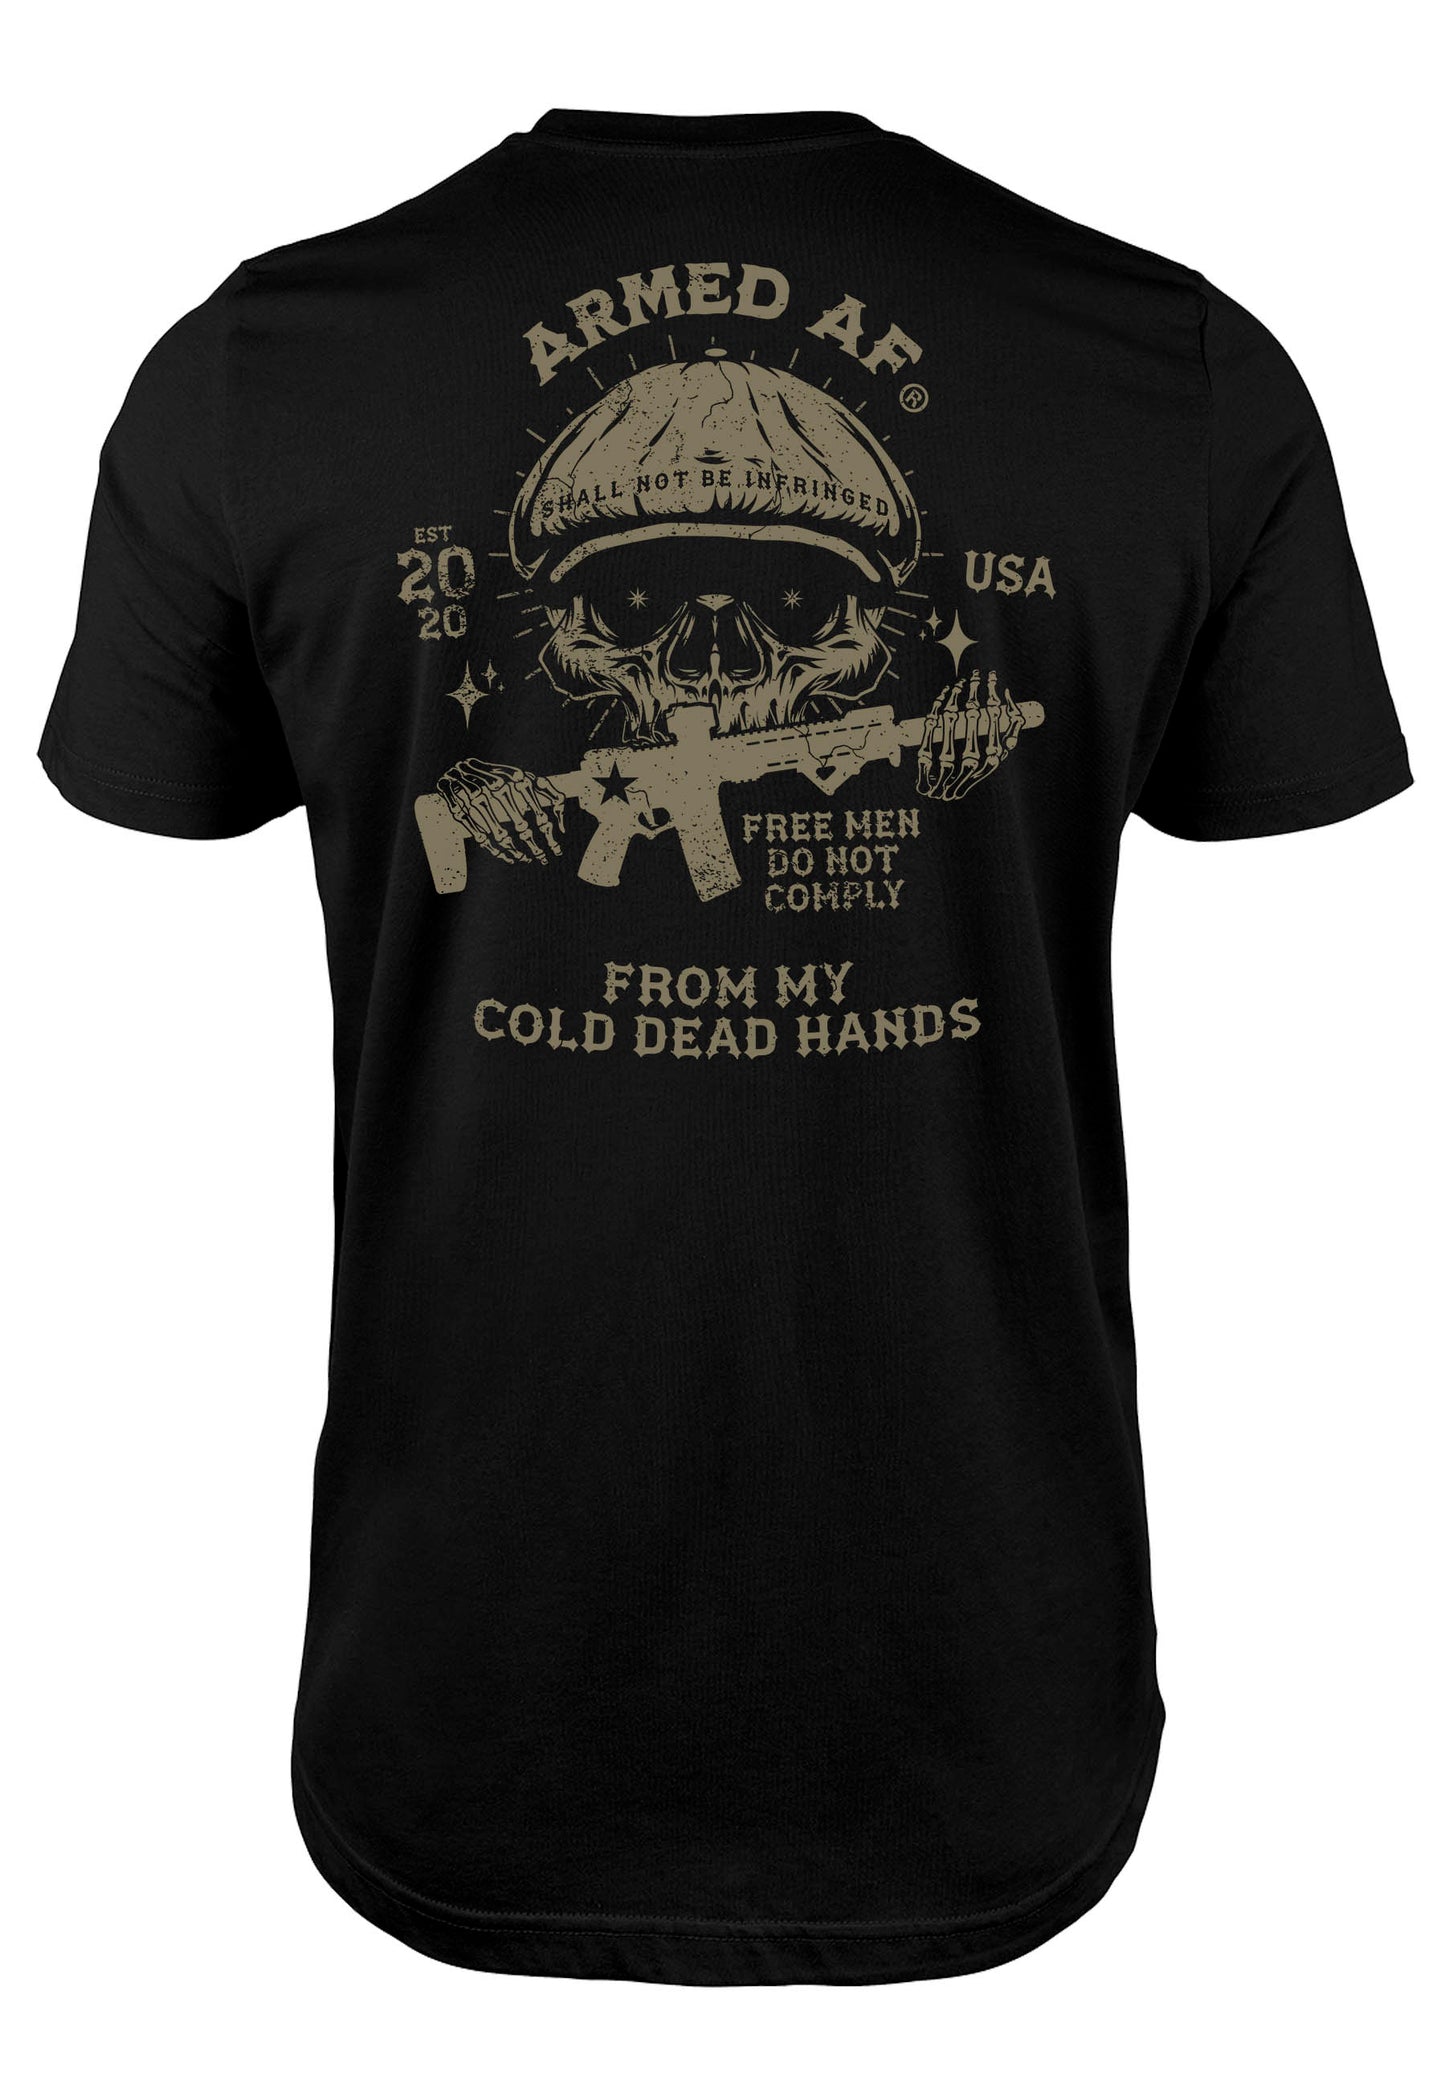 Cold dead hands t-shirt print on back of shirt